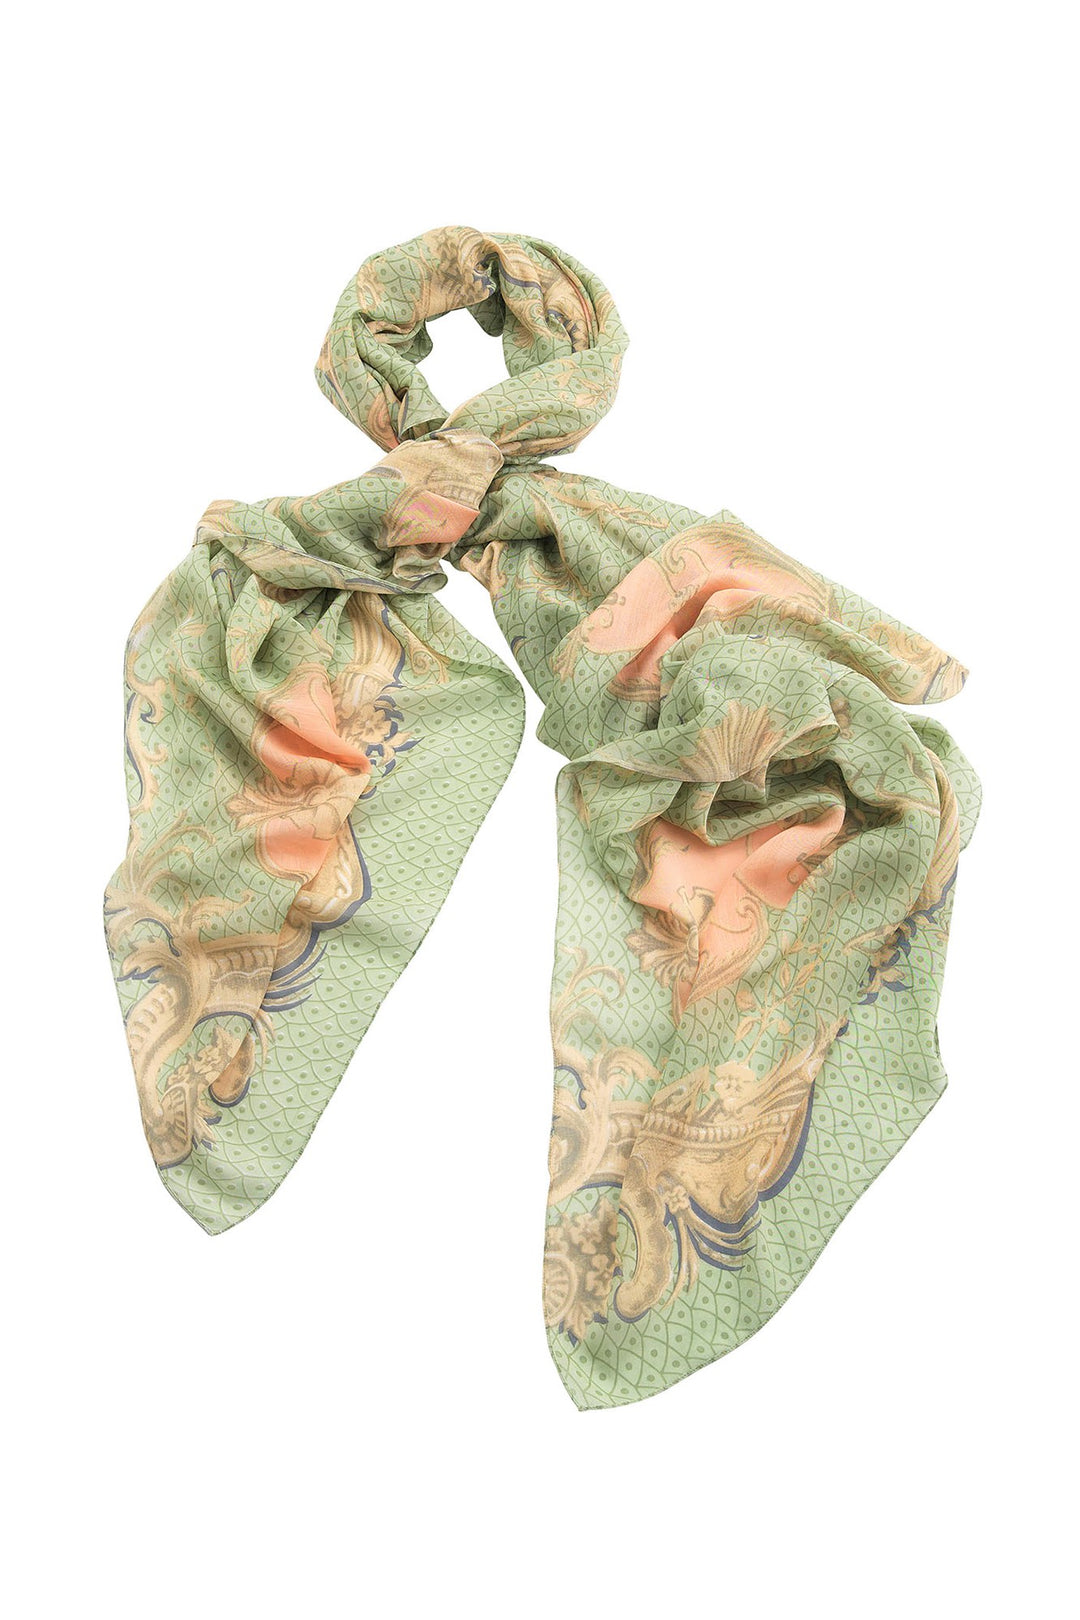 One Hundred Stars Rococo Aqua Scarf- Our scarves are a full 100cm x 200cm making them perfect for layering in the winter months or worn as a delicate cover up during the summer seasons. 